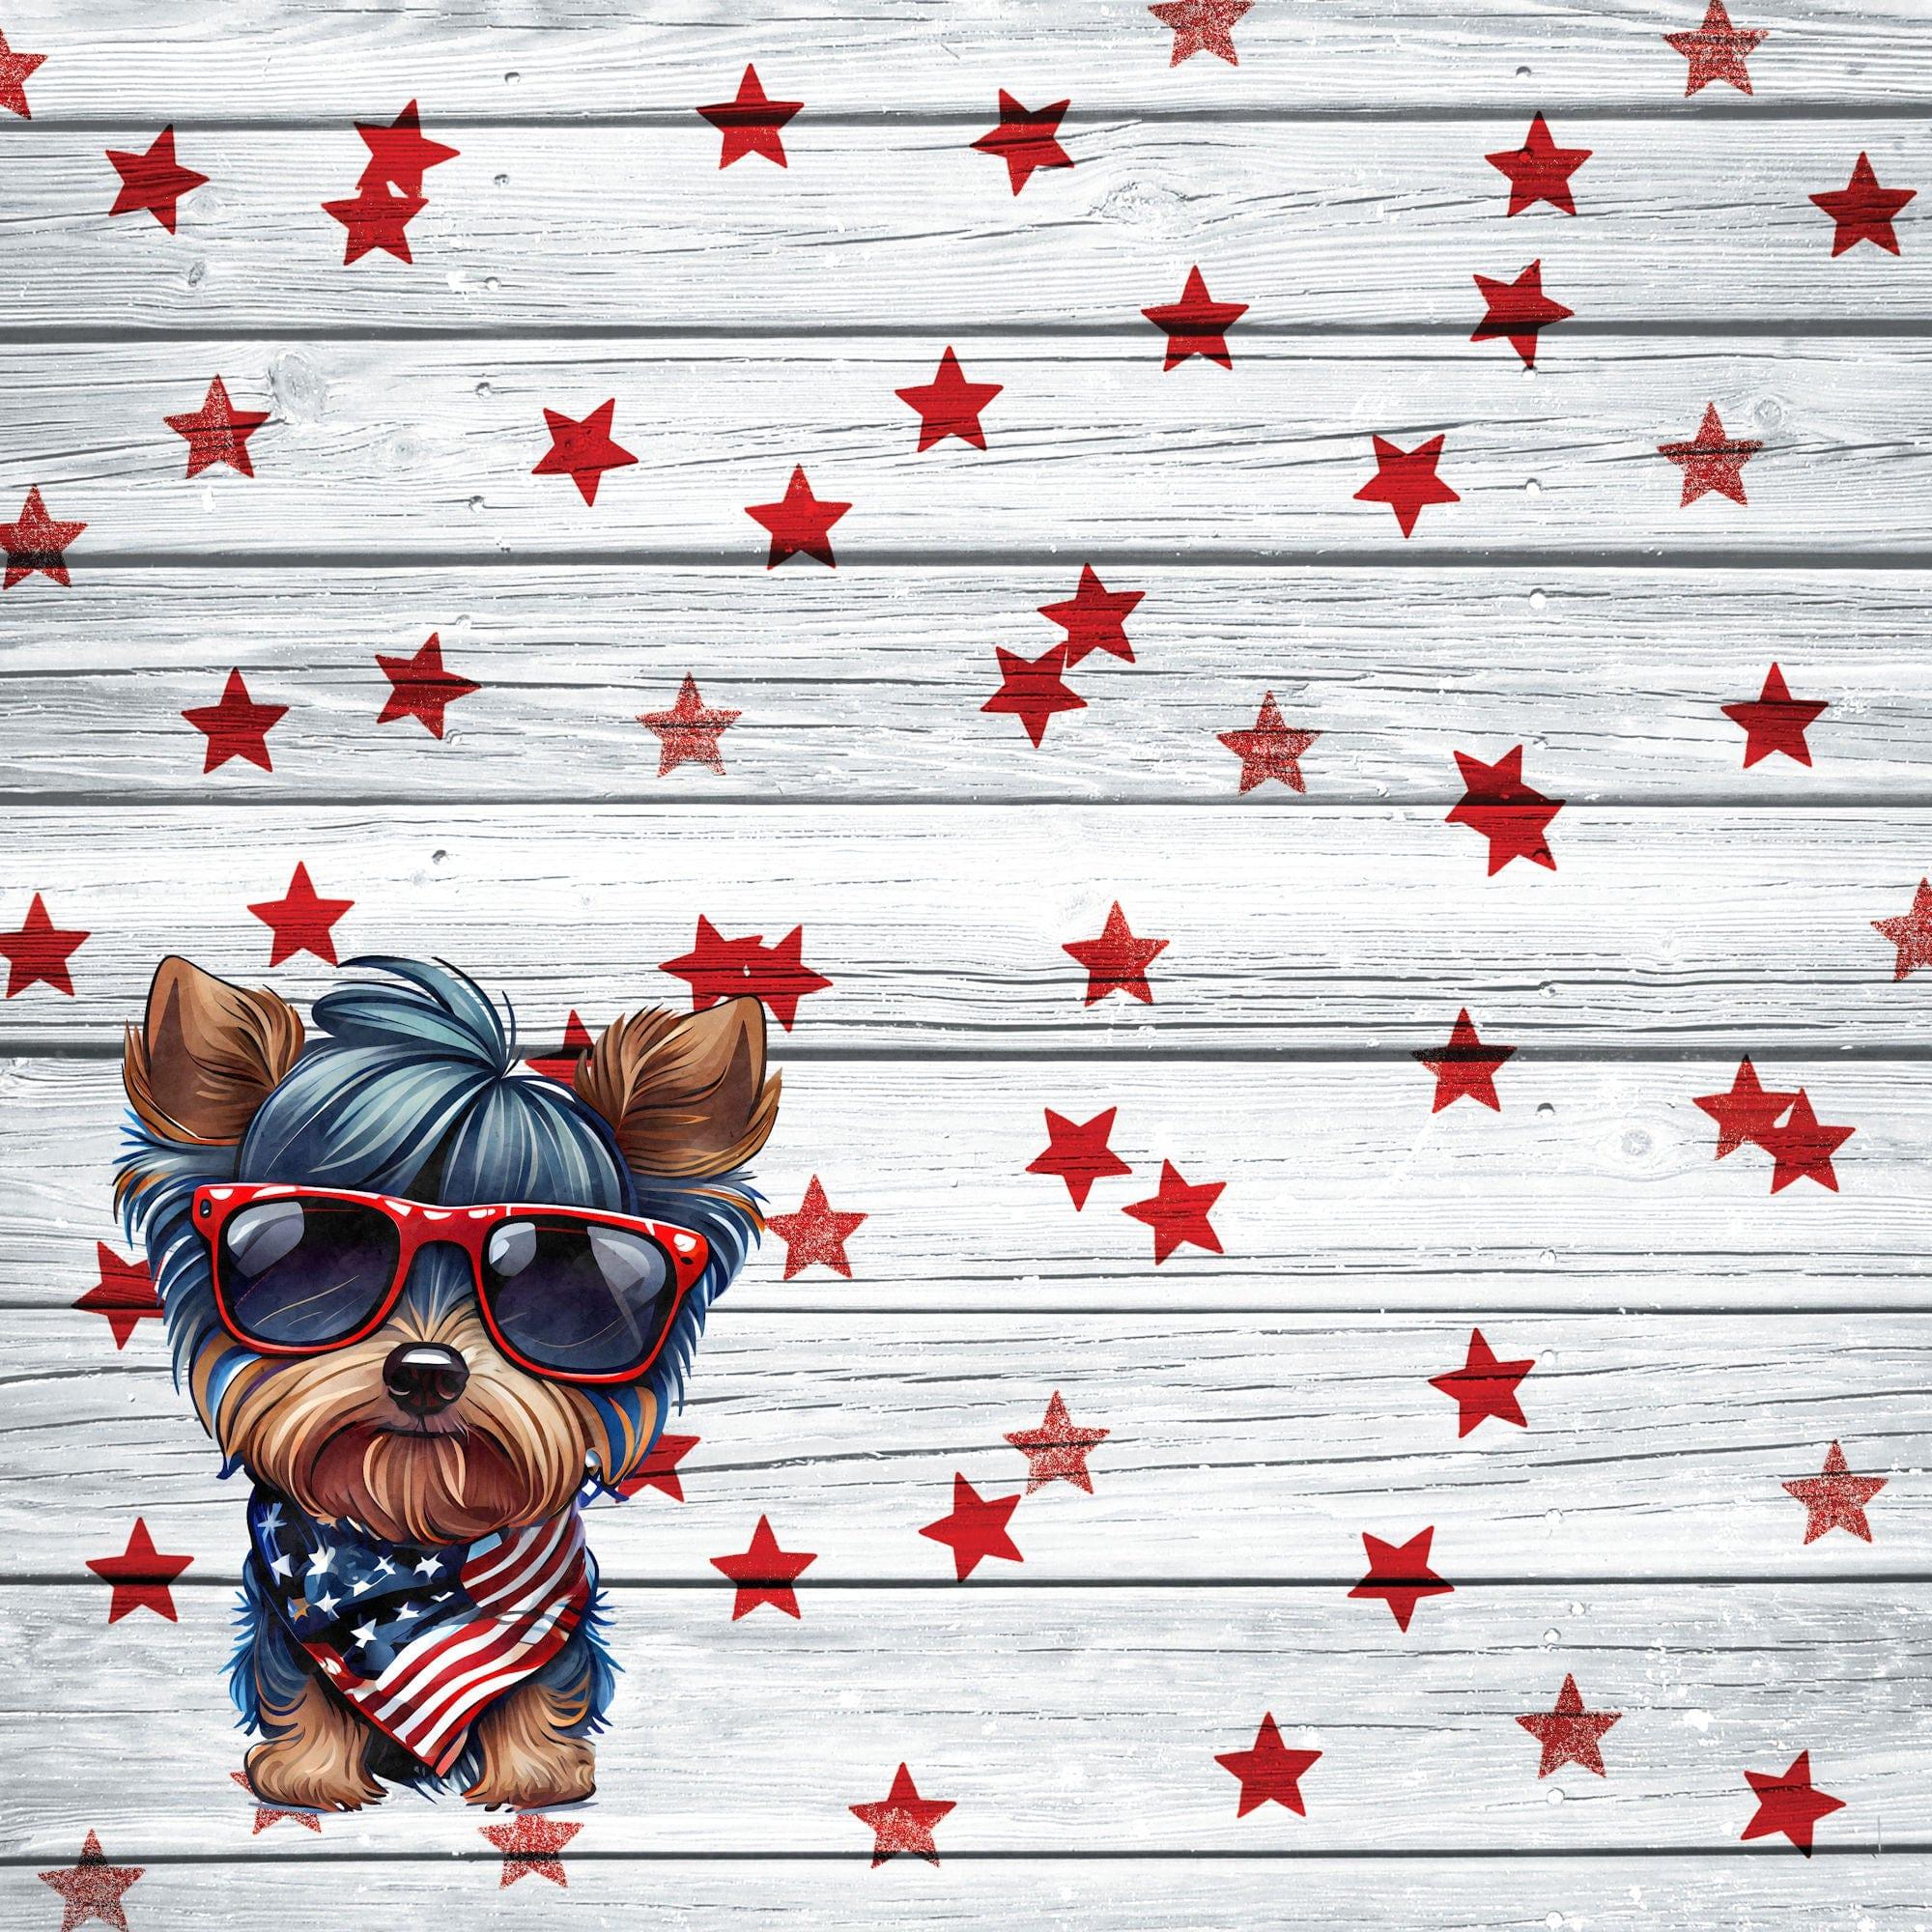 Patriotic Pups Collection Yorkshire Terrier 12 x 12 Double-Sided Scrapbook Paper by SSC Designs - Scrapbook Supply Companies